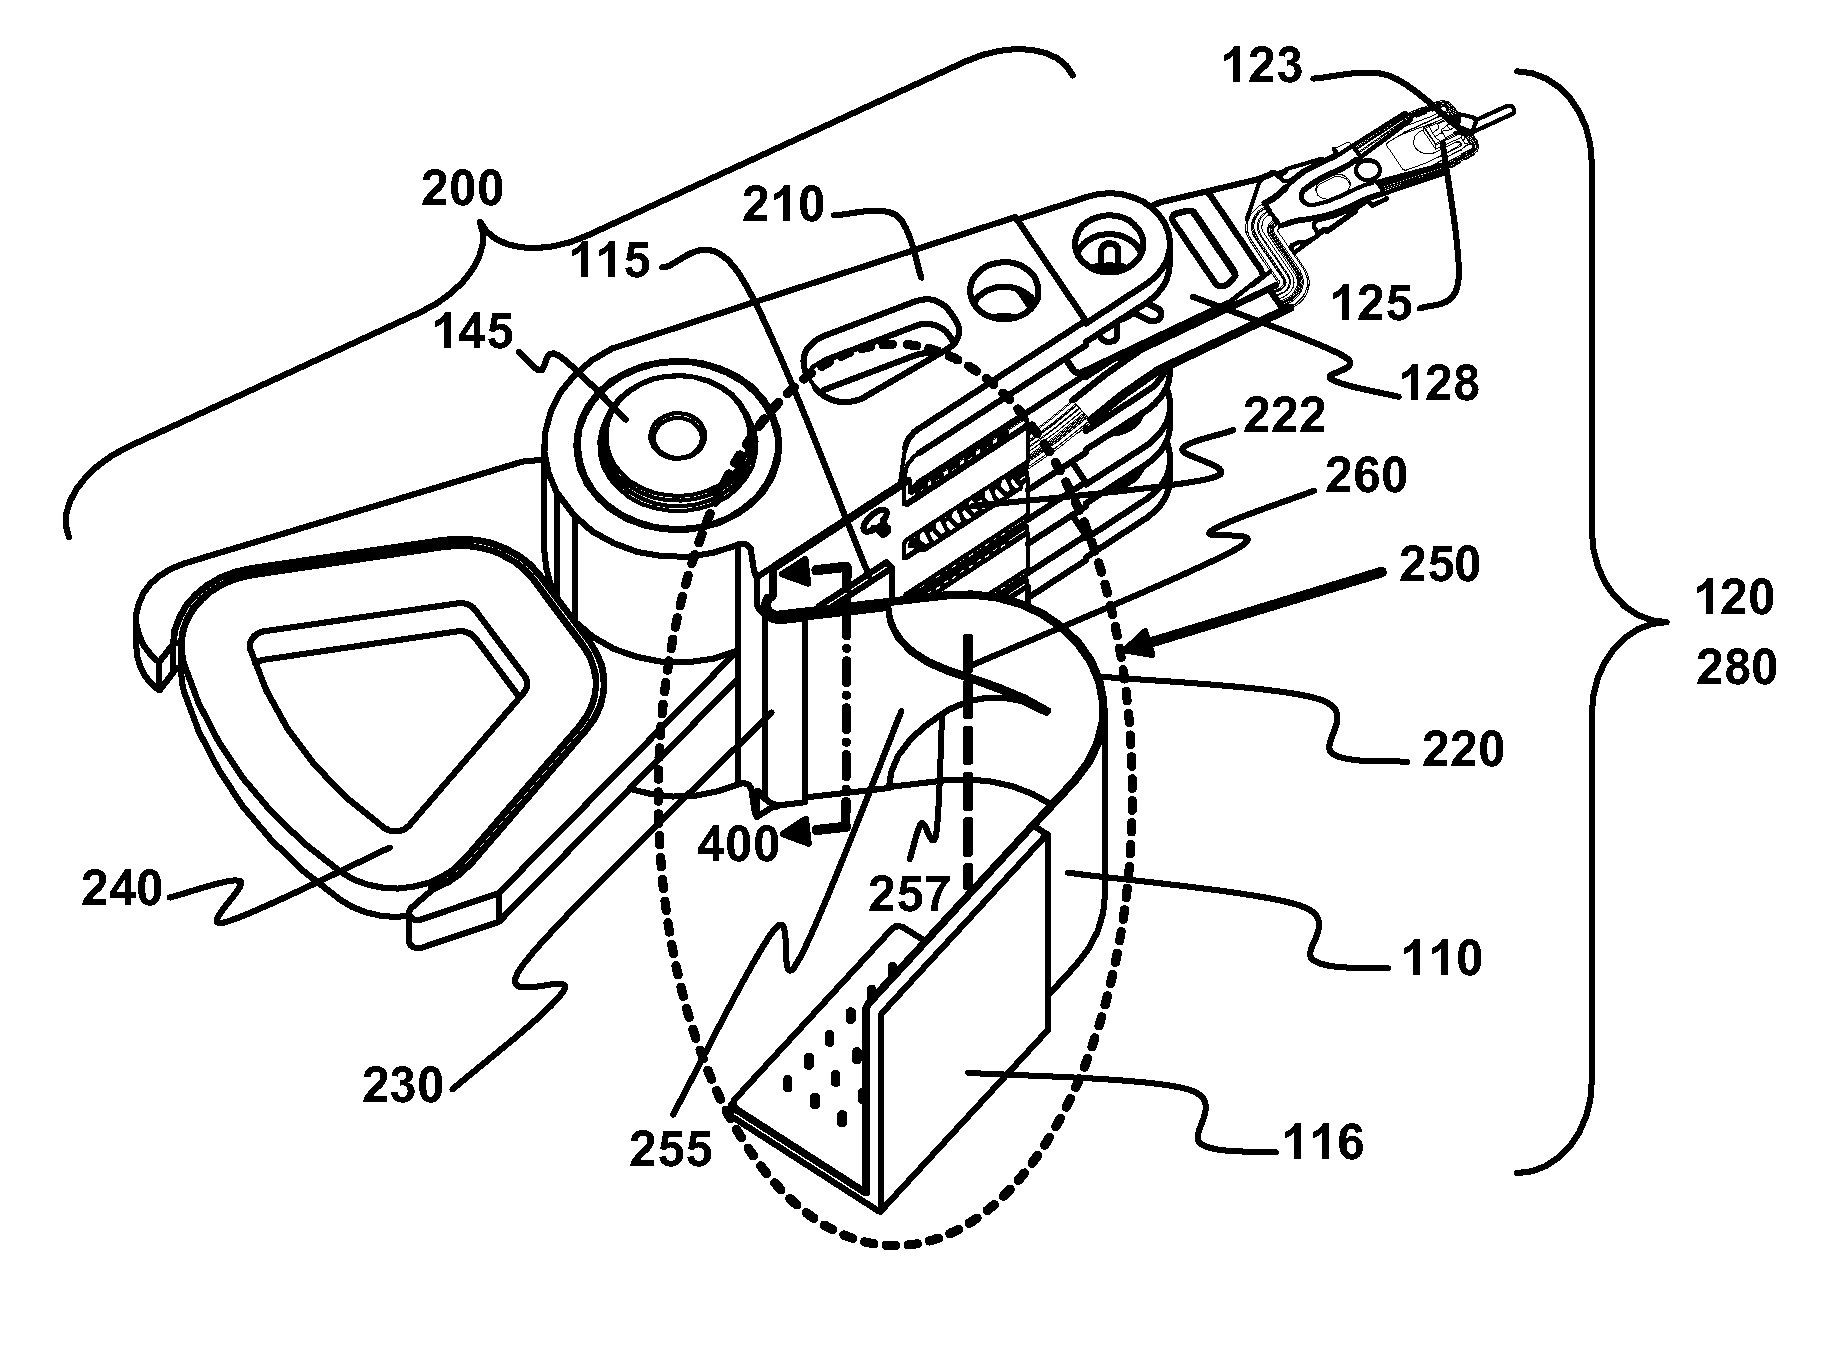 Symmetrically tapered constrained layer damper for a flex cable assembly for a hard disk drive